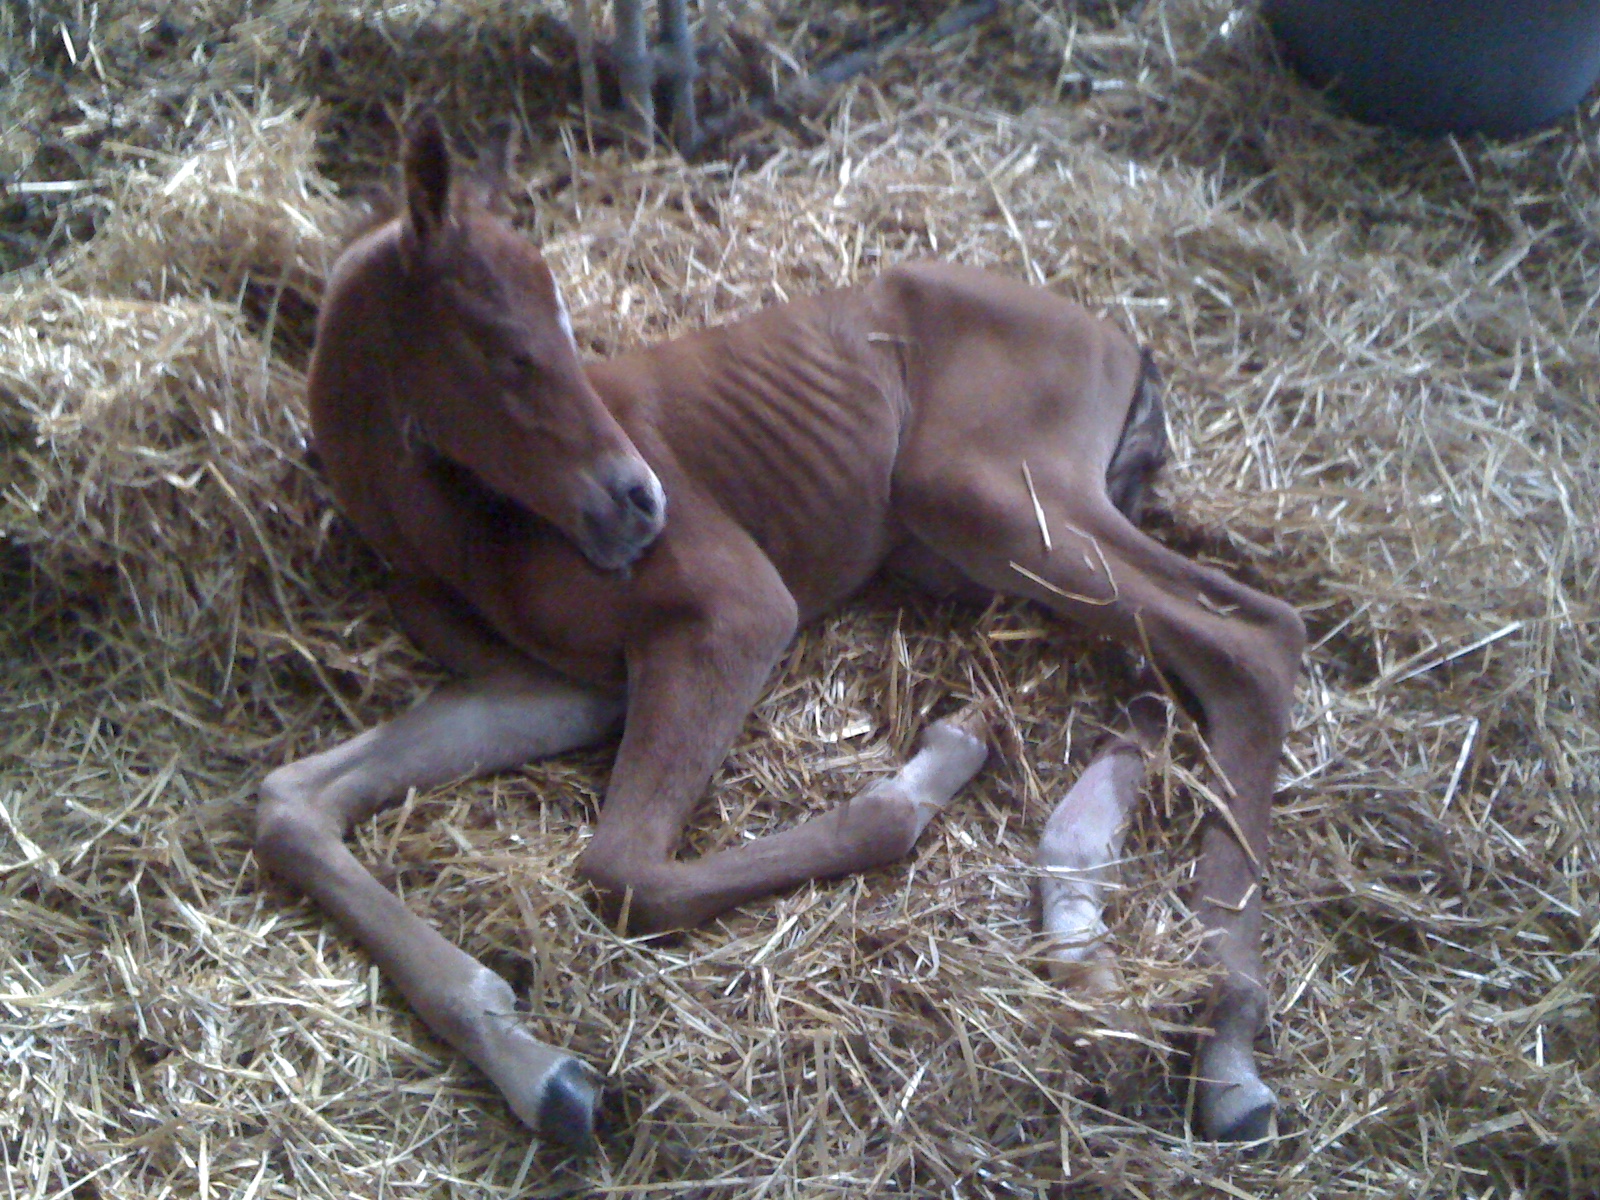 Joxer - a couple hours old